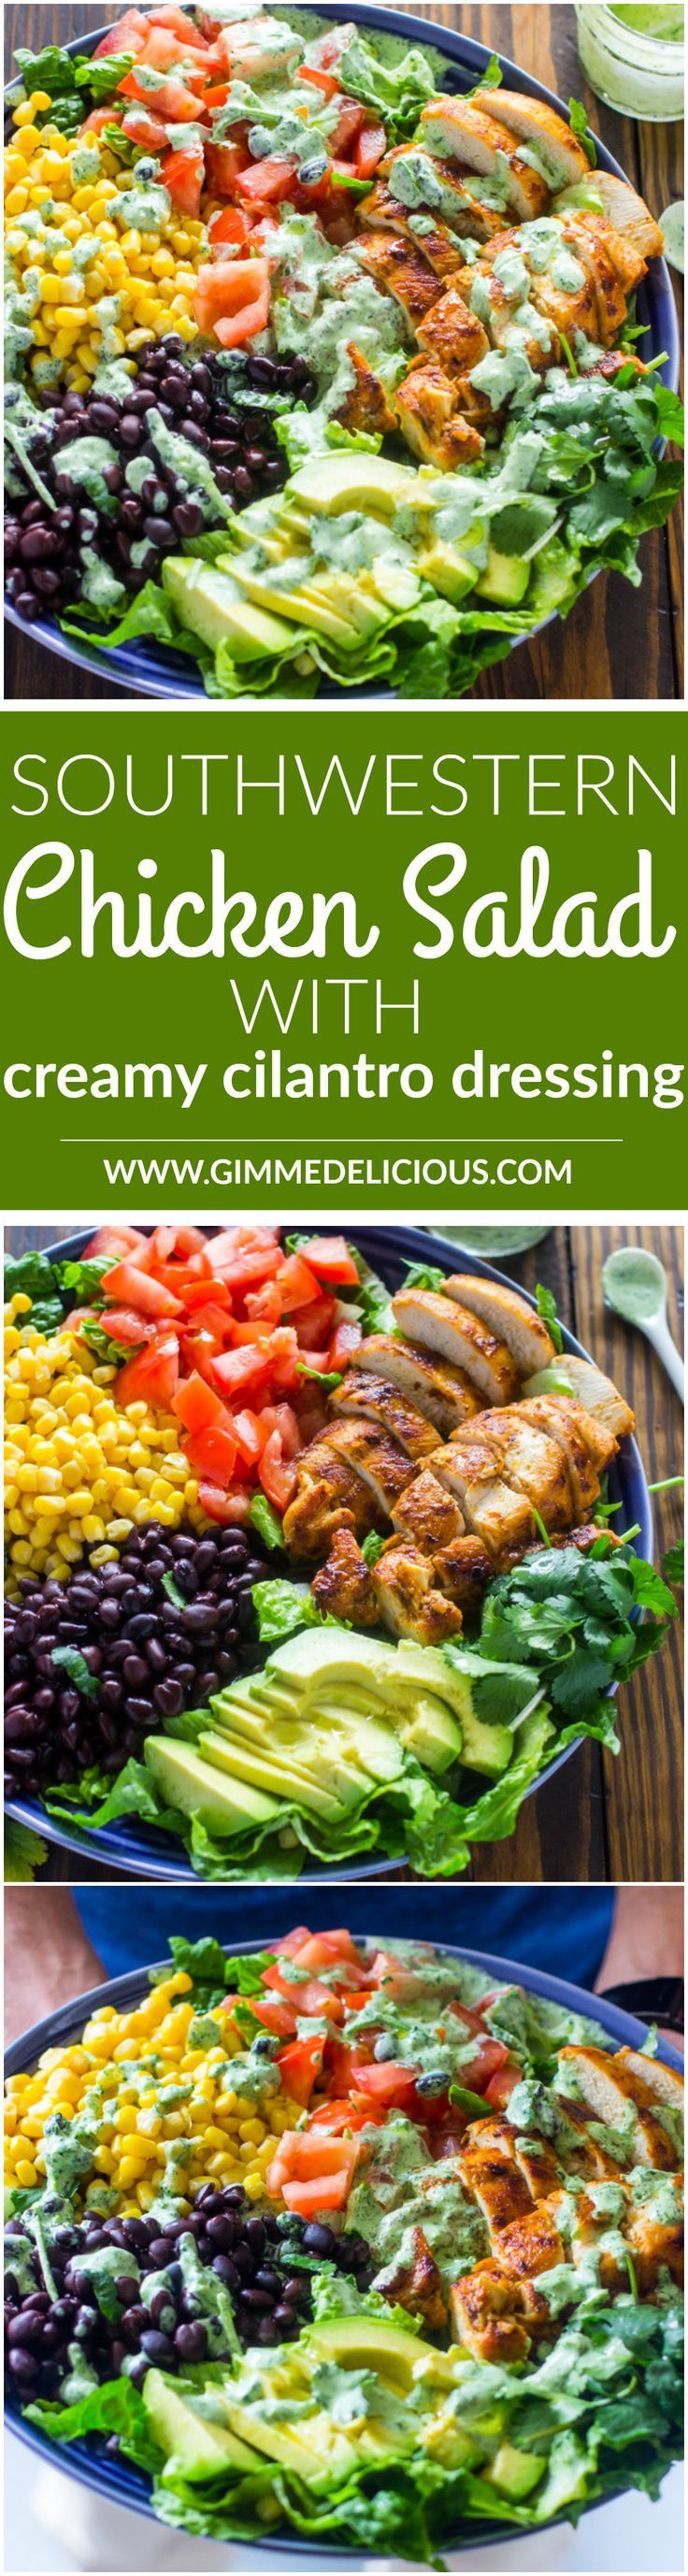 Southwestern chicken salad with creamy cilantro dressing is 1000x more delicious, fresher, and healthier than any restaurant salad